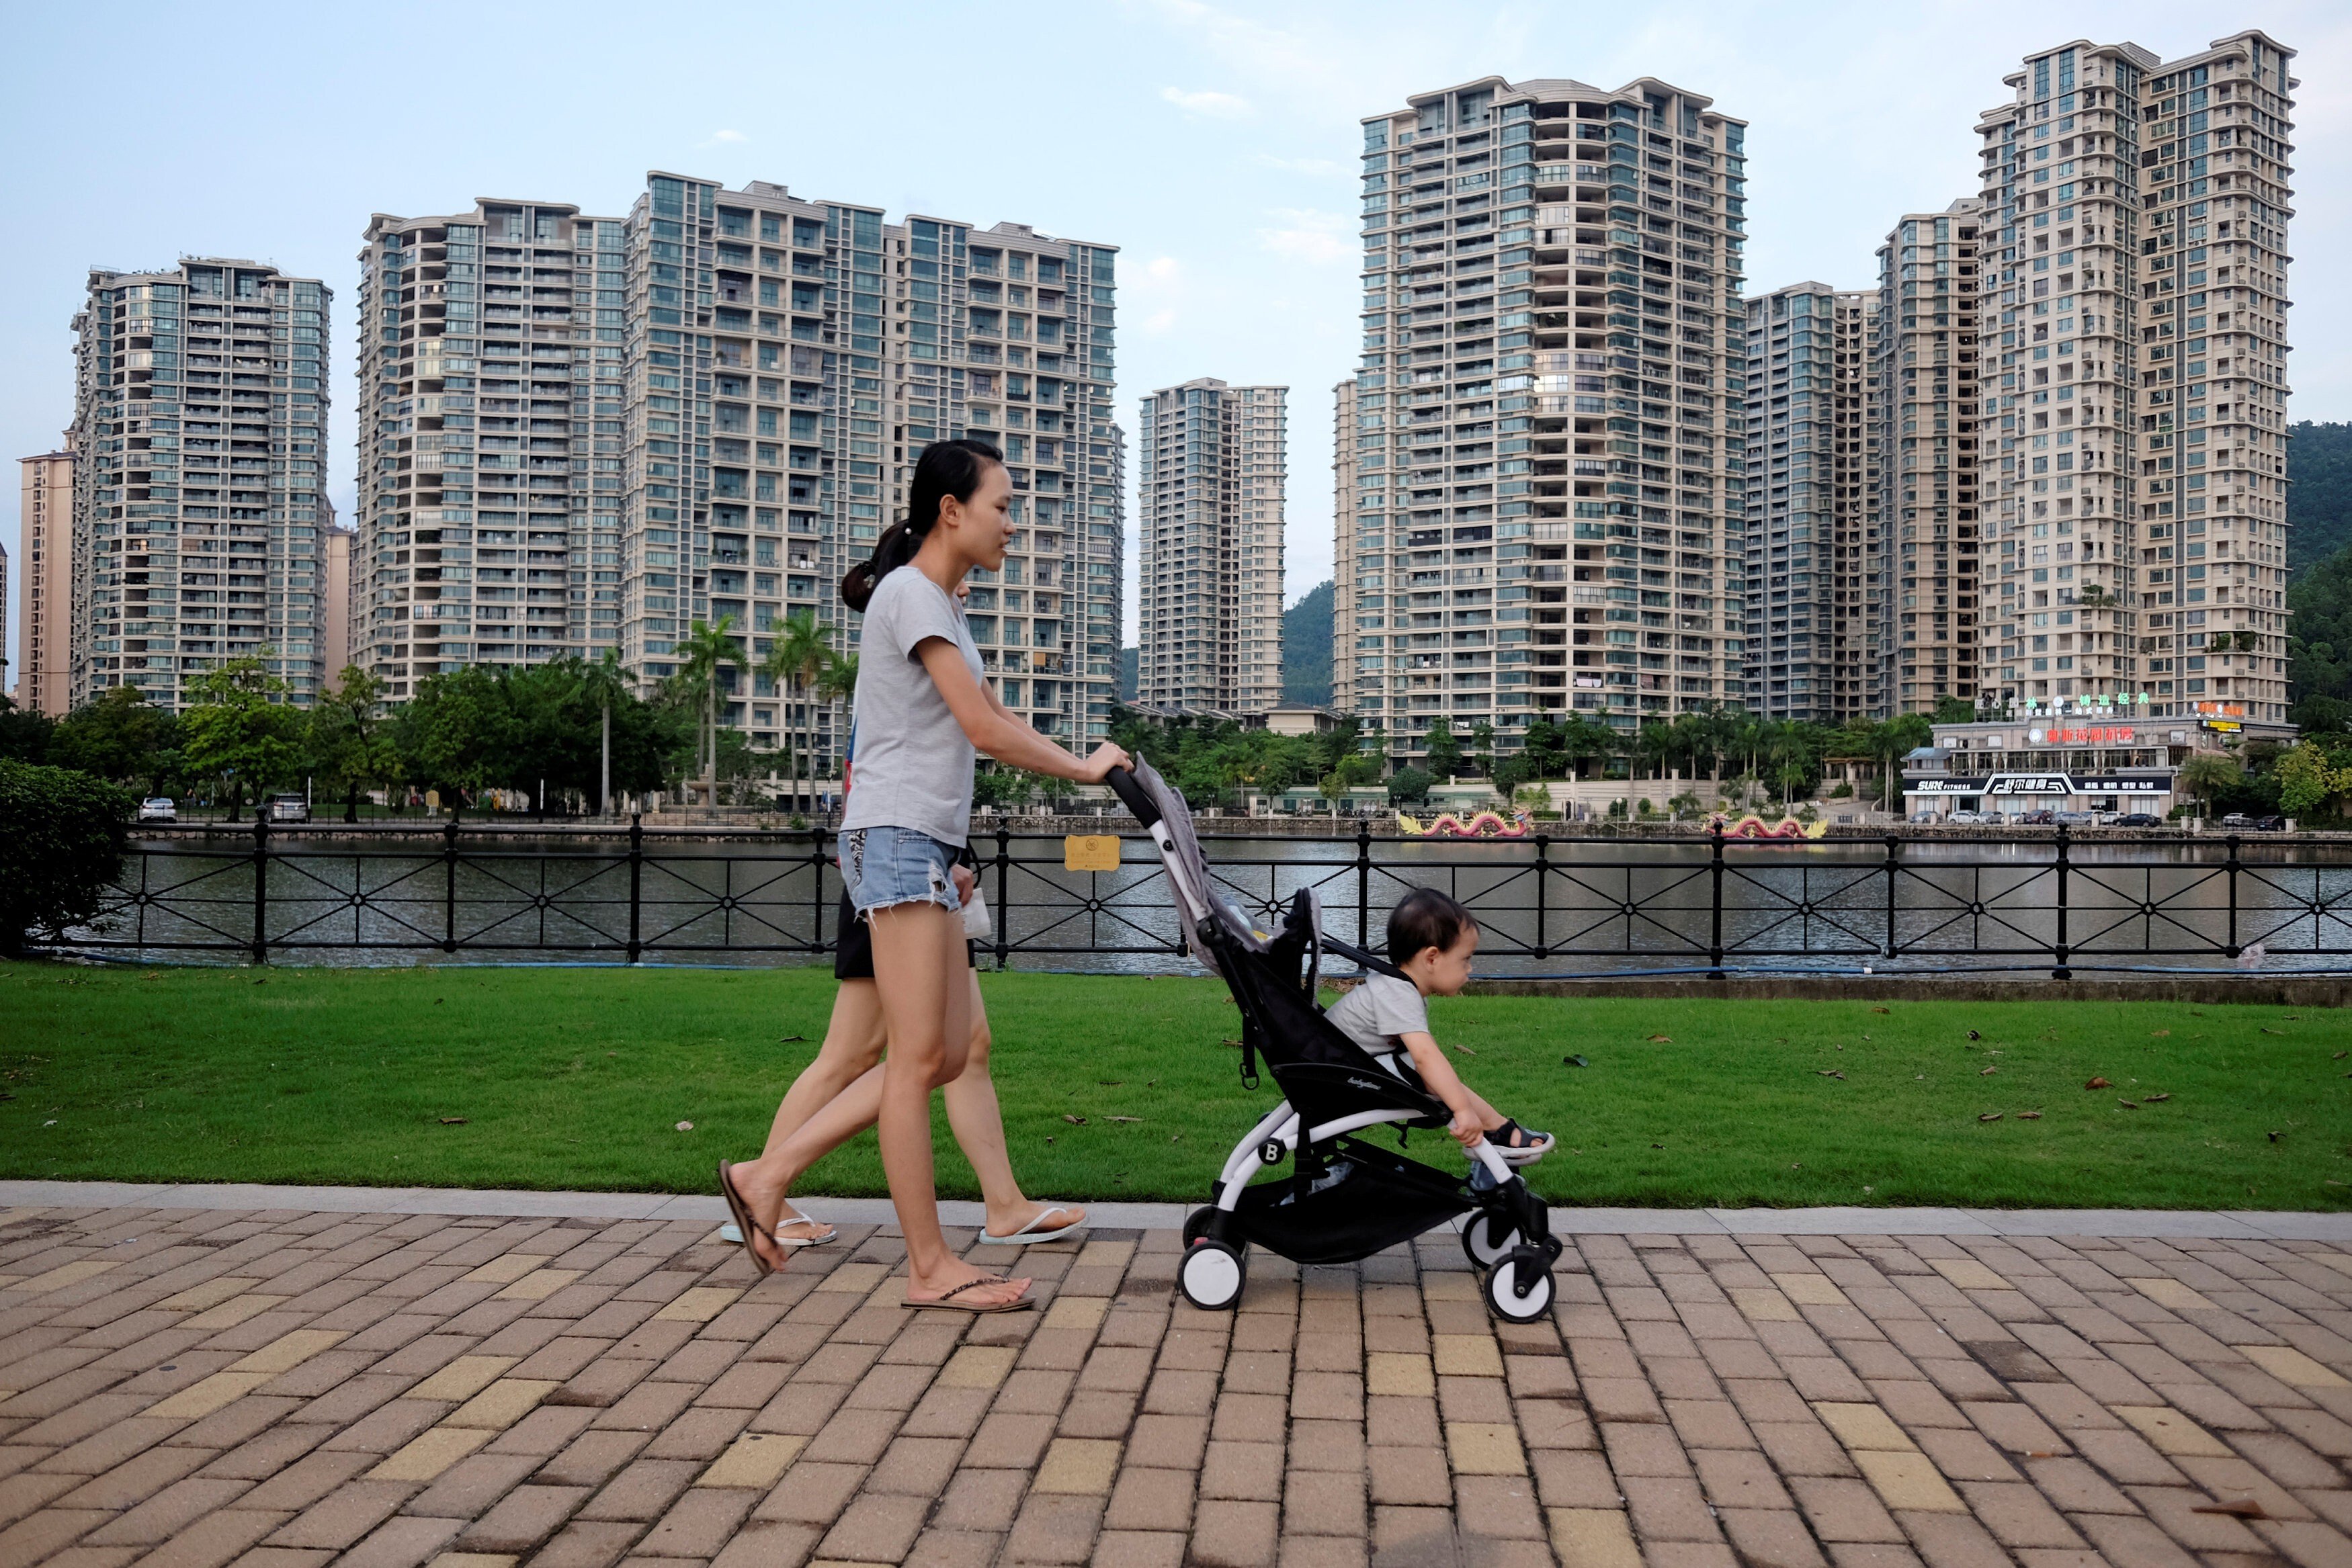 A non-local resident buyer must show six months’ proof of social security fund contribution or tax payment to be eligible for one property in Zhongshan. Photo: REUTERS